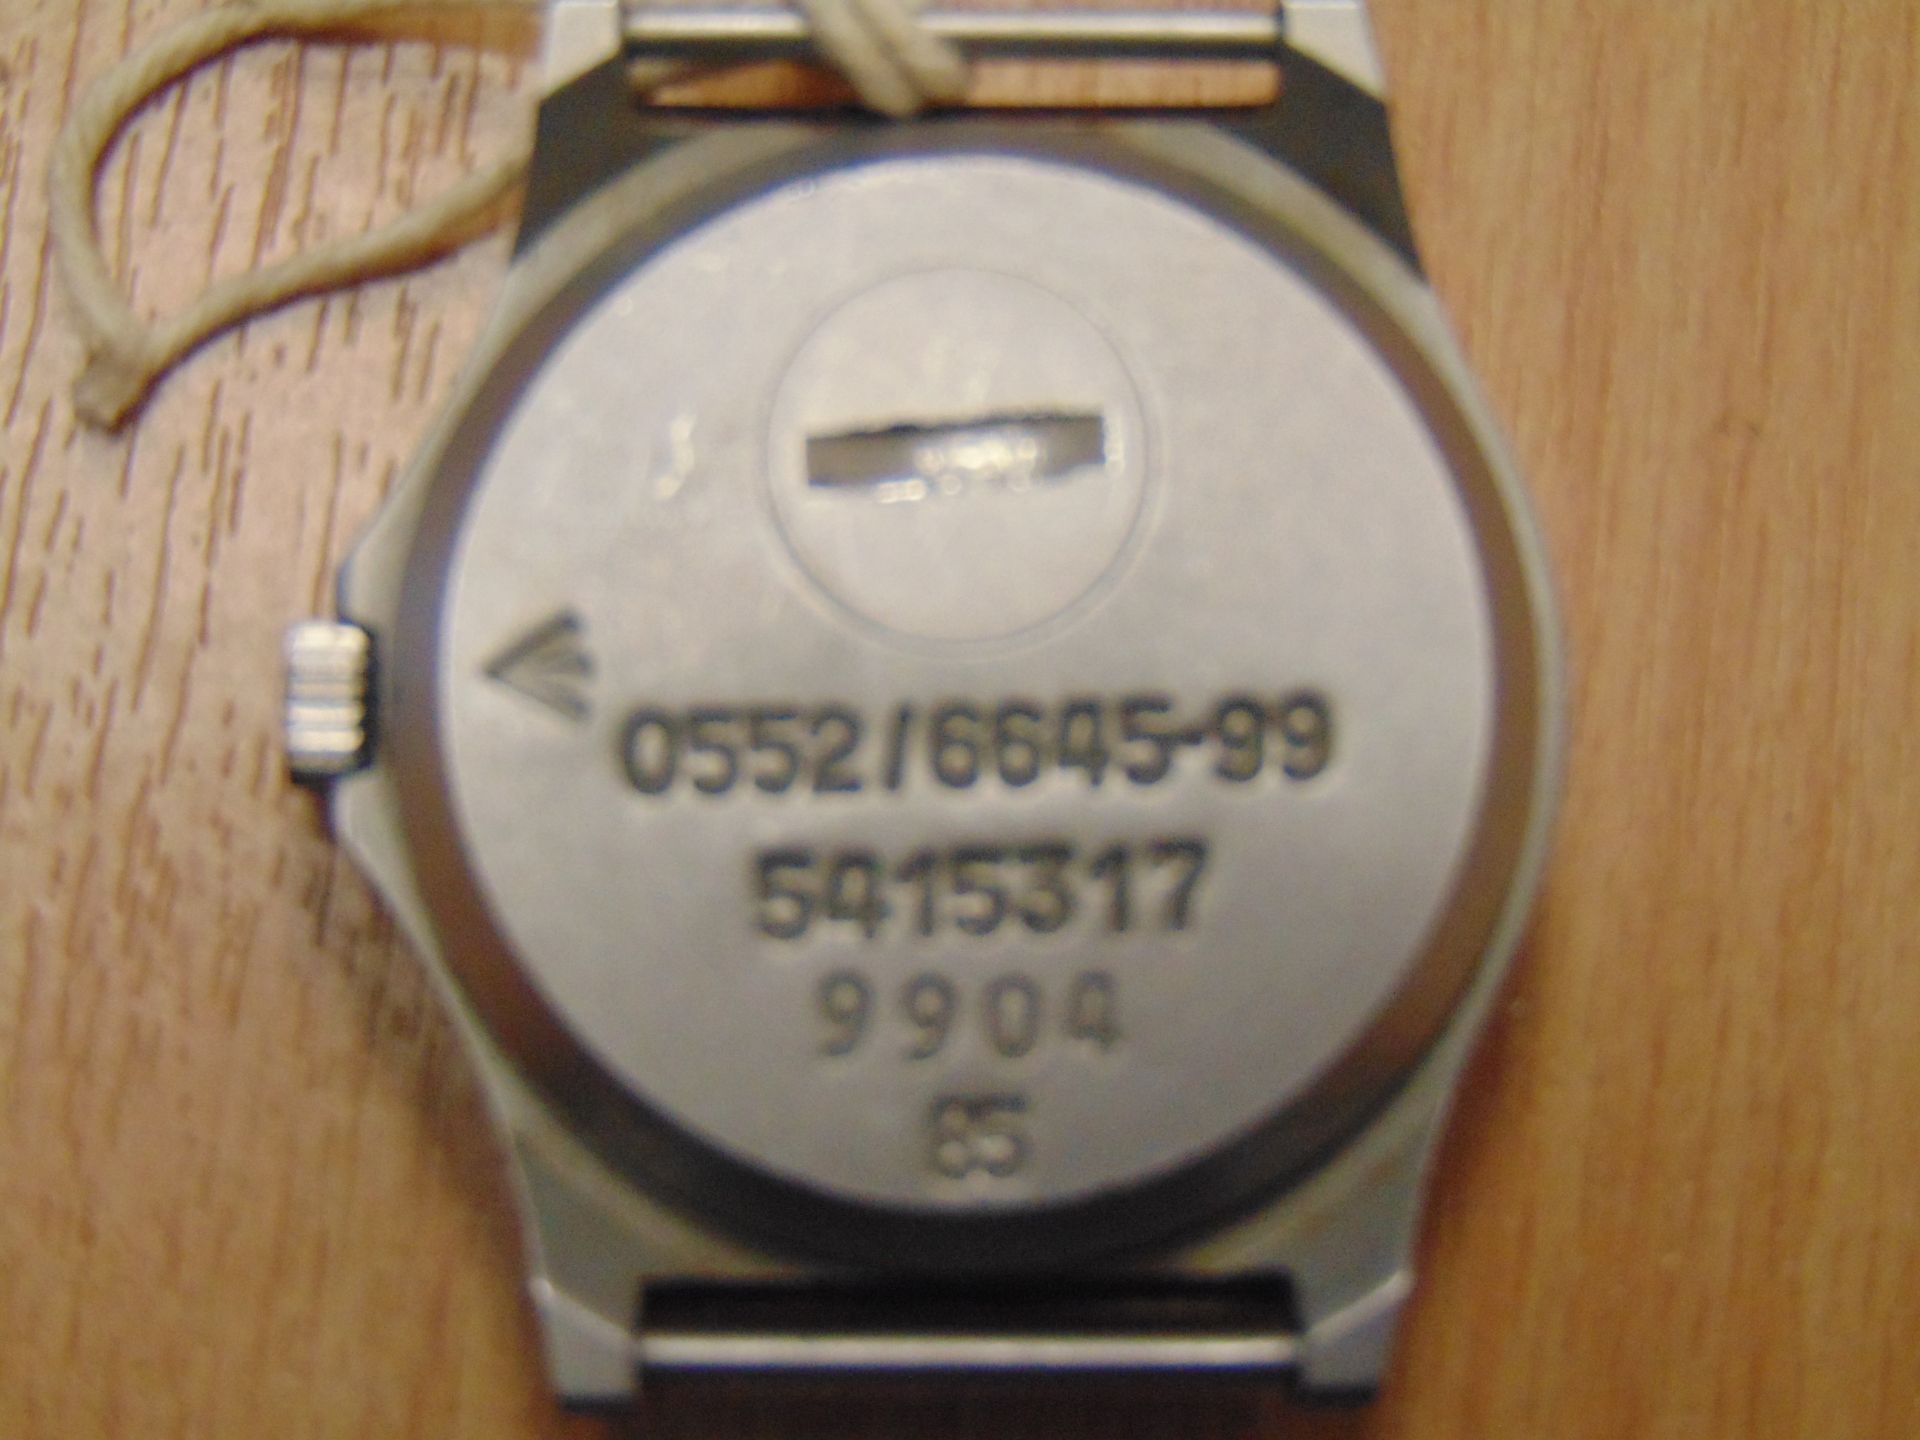 RARE CWC FAT BOY 0552 RM/ NAVY ISSUE SERVICE WATCH DATE 1985 - Image 3 of 4